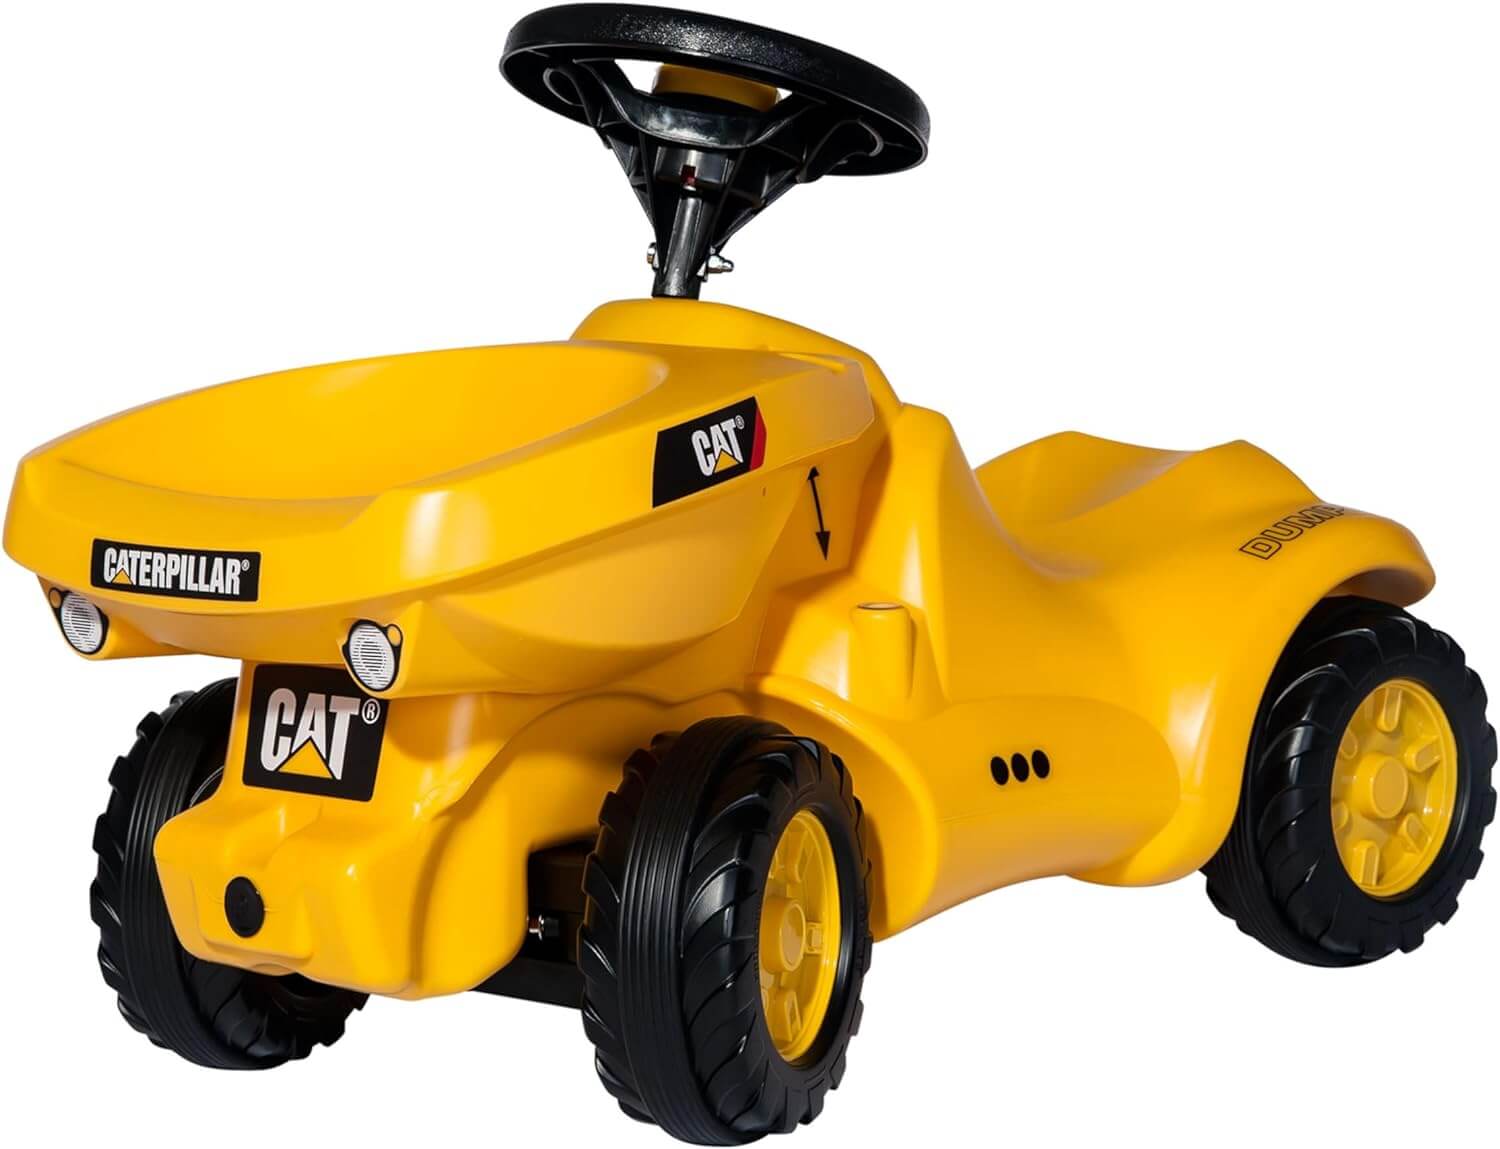 Kettler USA Rolly CAT Baby Dumper Push Ride-On Riding Toy, 132249